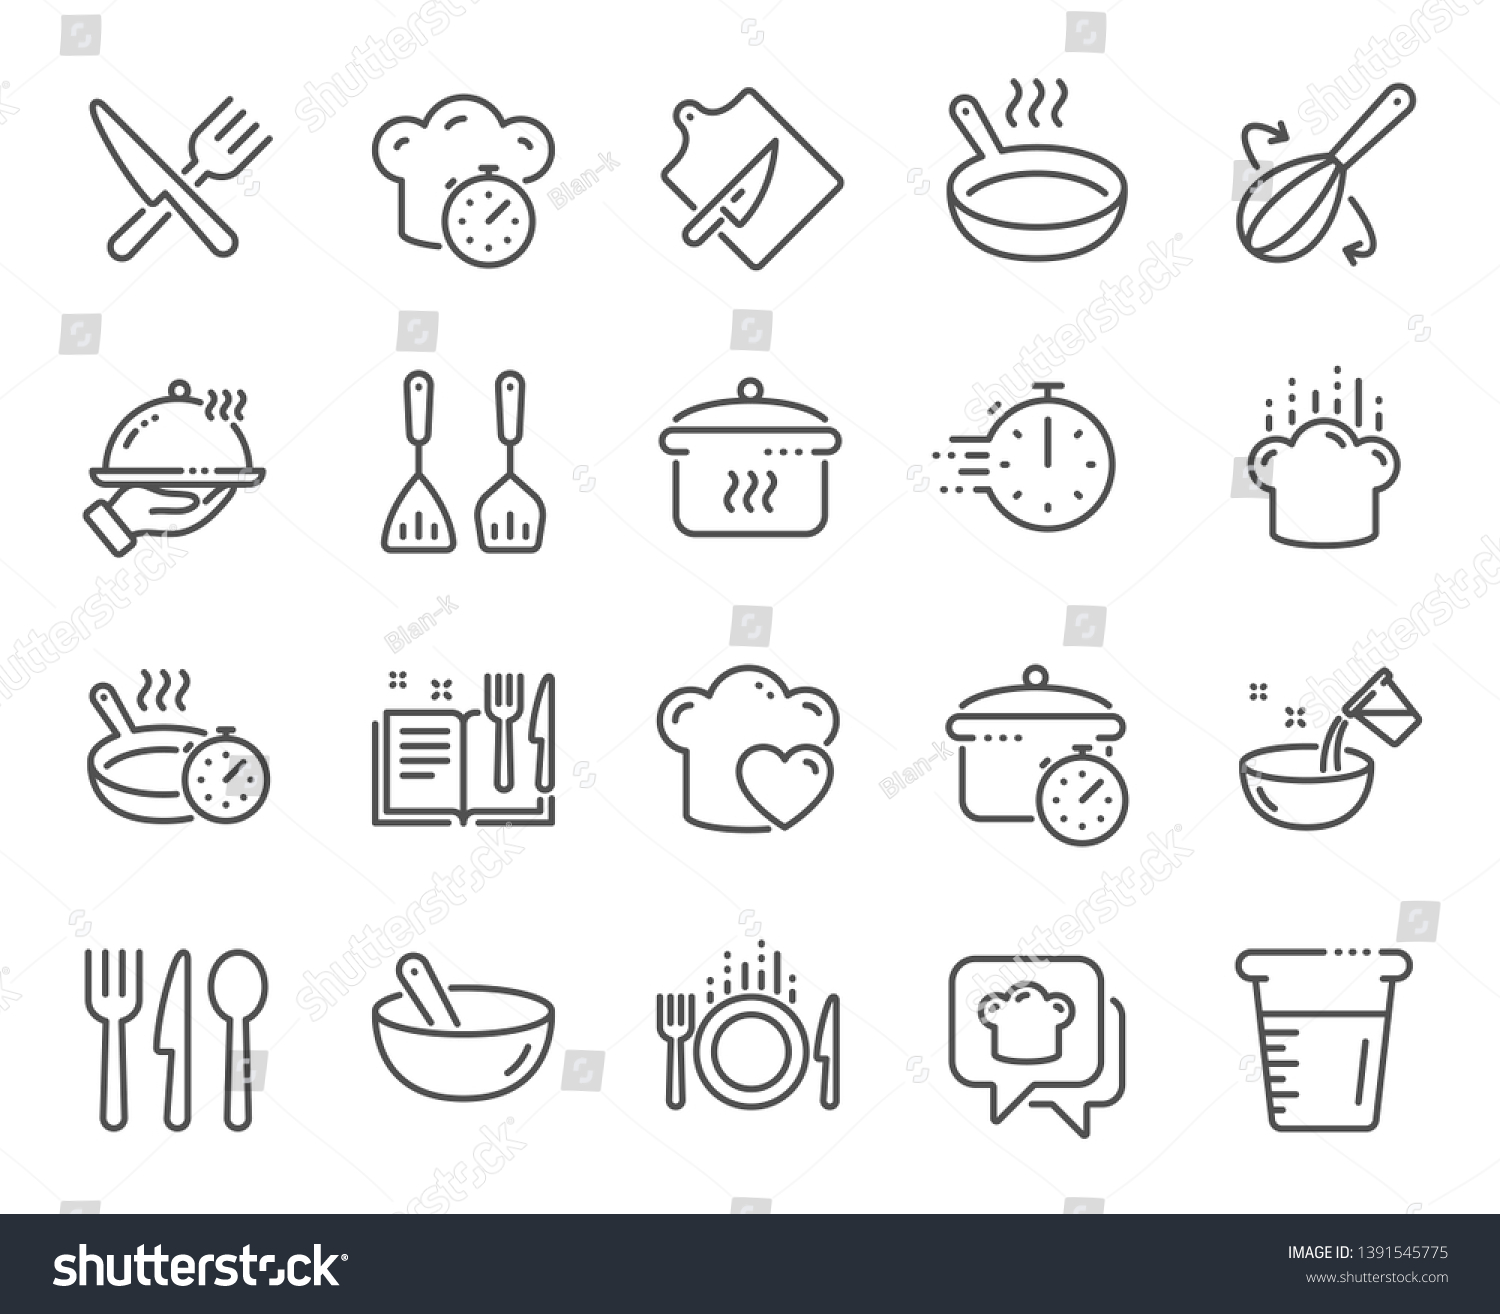 Cooking line icons. Boiling time, Frying pan and Kitchen utensils. Fork, spoon and knife line icons. Recipe book, chef hat and cutting board. Cooking book, frying time, hot pan. Vector #1391545775